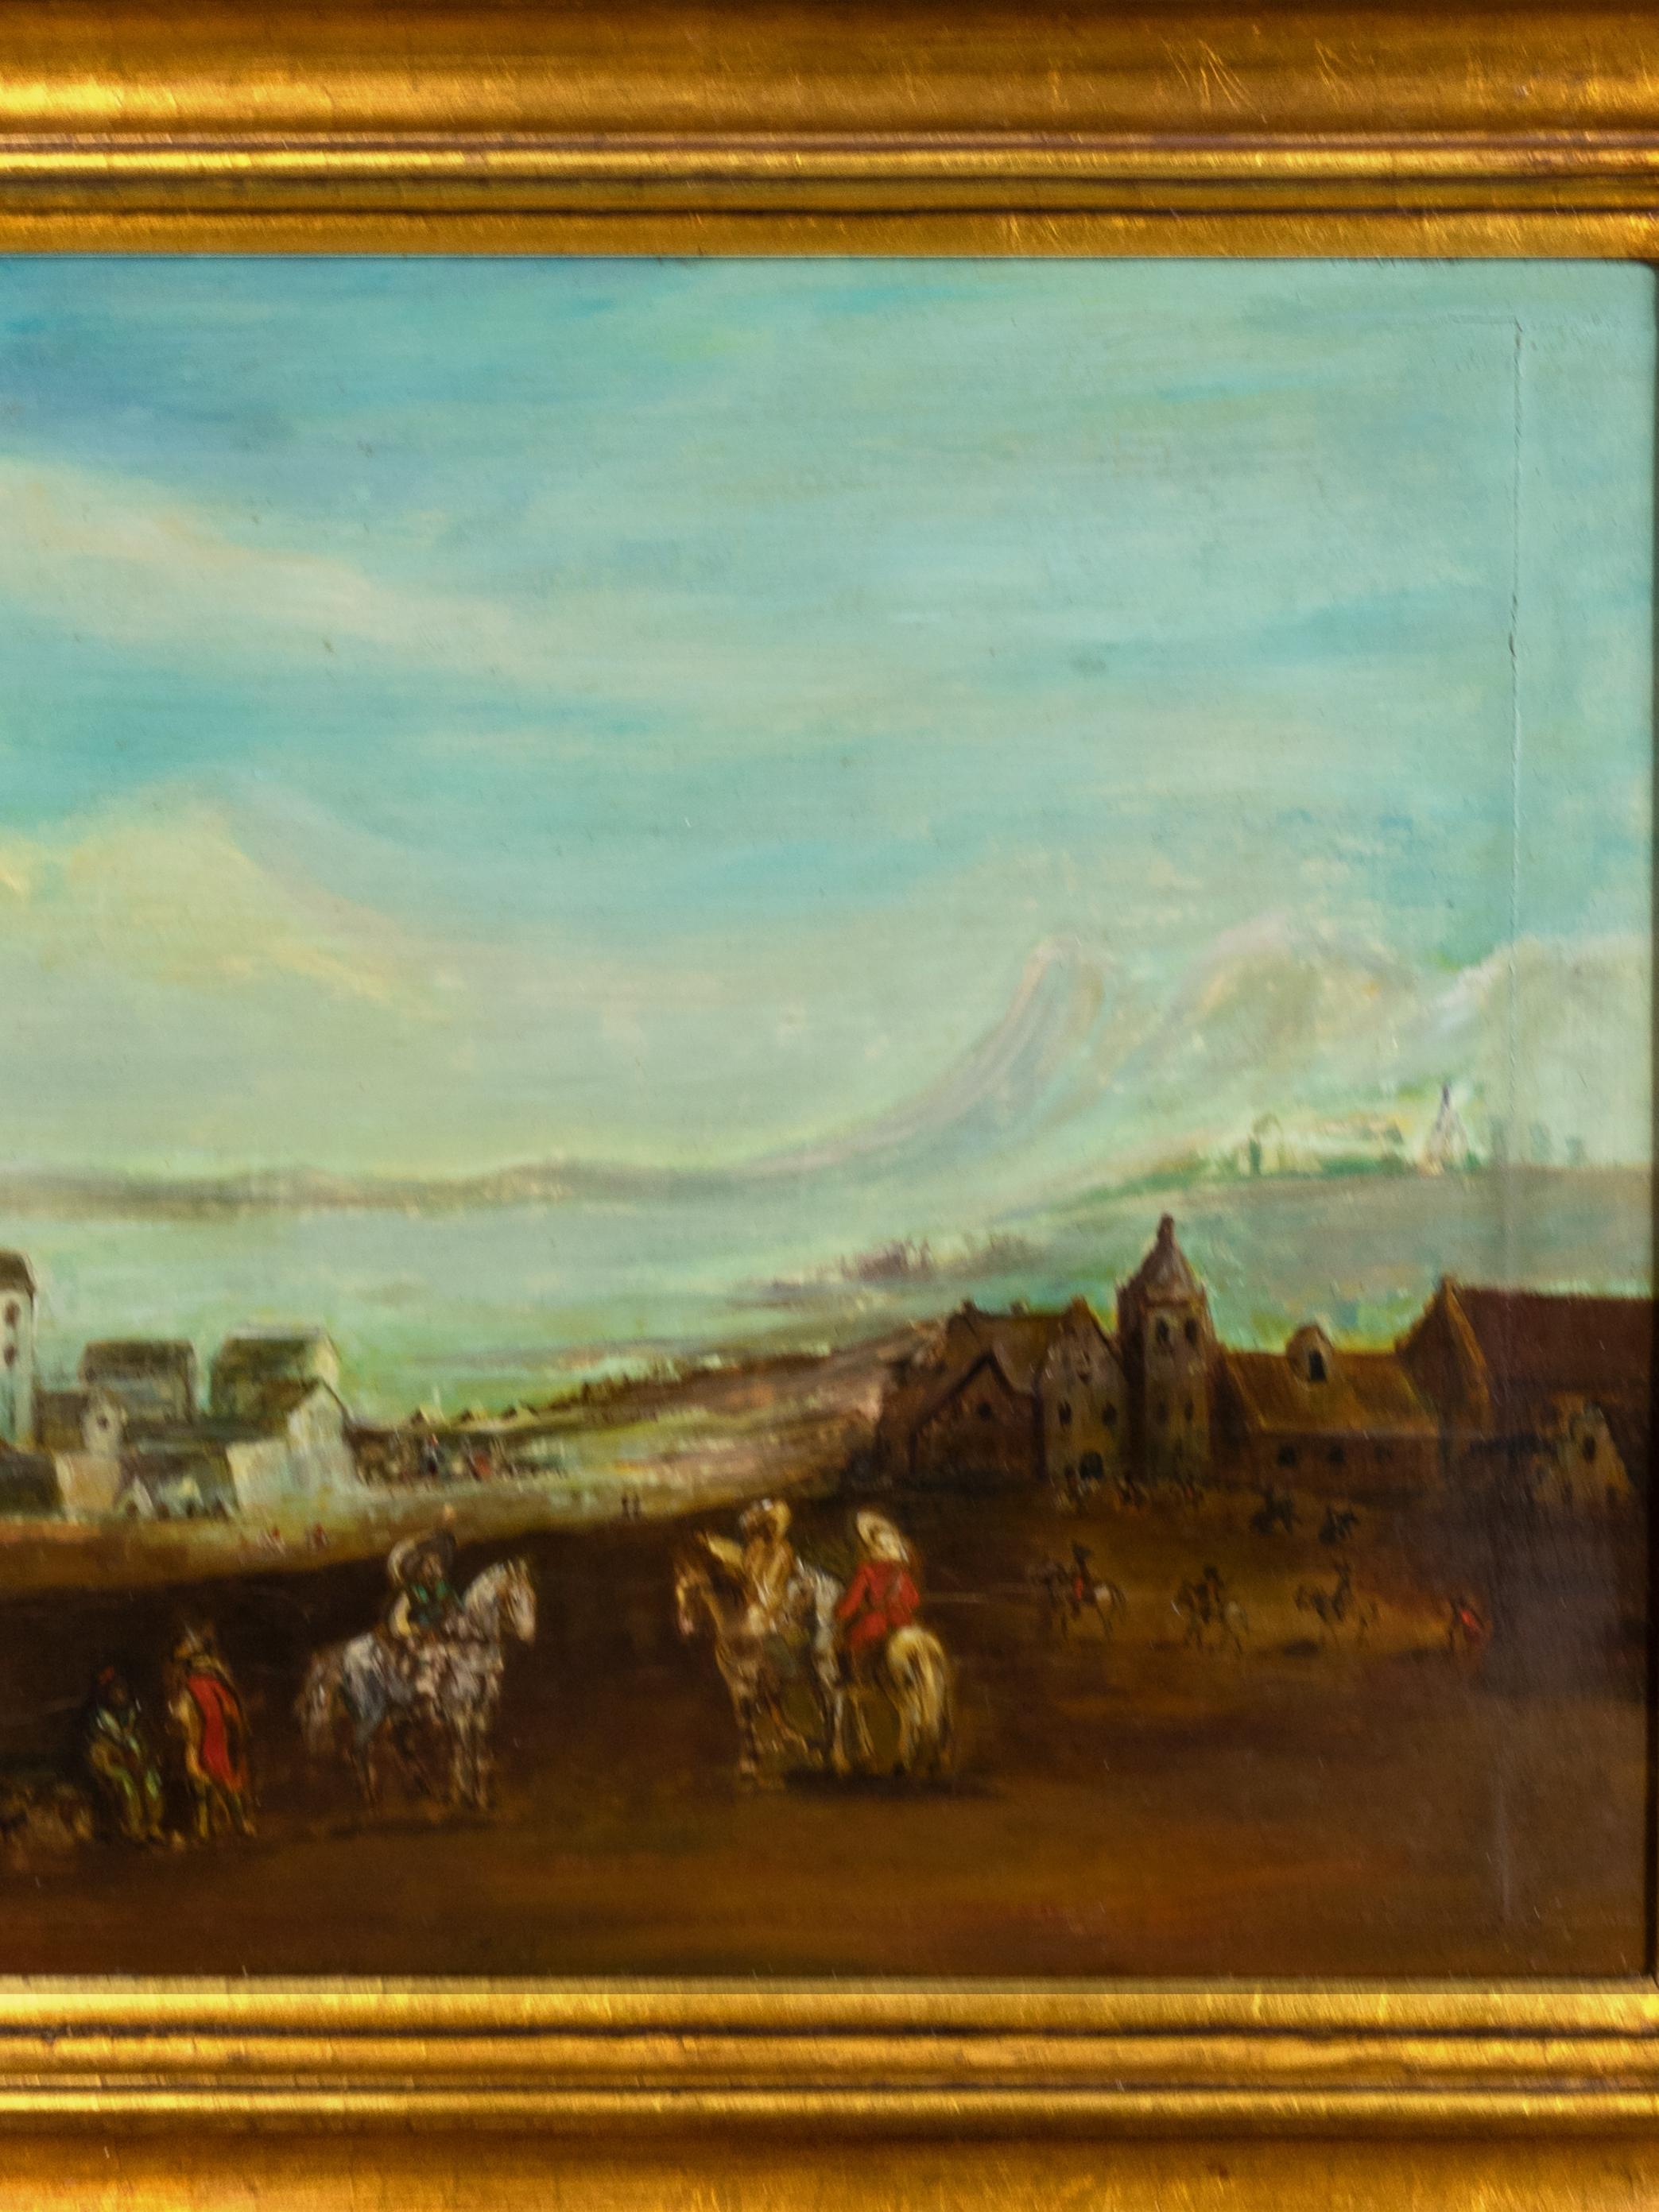 An Old World romance oil theme depicts horseback riders arriving at a little city near to a river and mountains. 

Frame 64 x 50 cm 
Canvas: 50 x 37.5 cm

